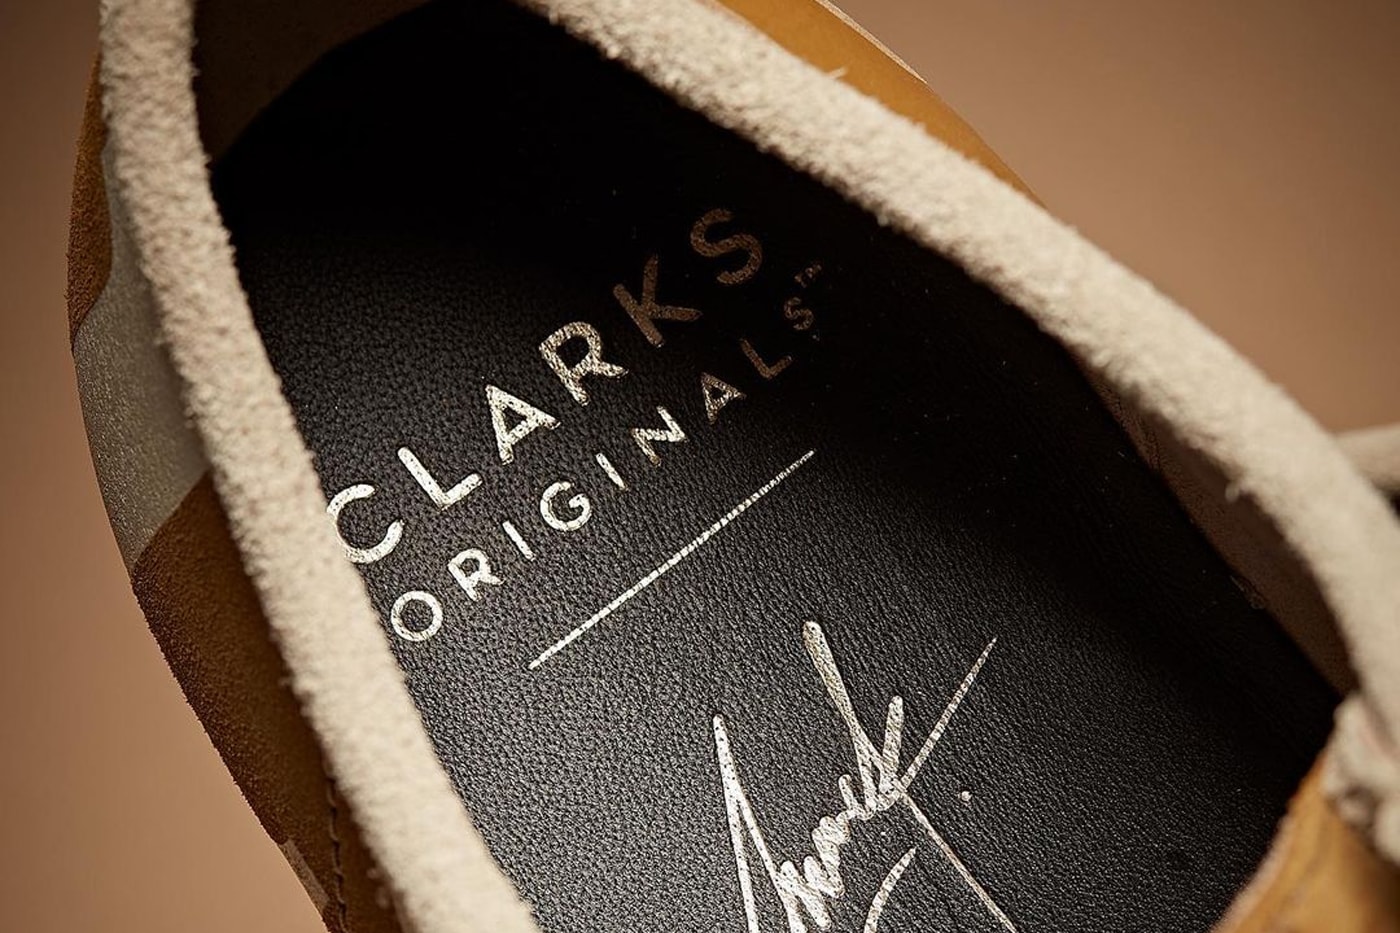 Clarks Originals Cooks Up Burger-Inspired Boot With Vandy The Pink –  Footwear News